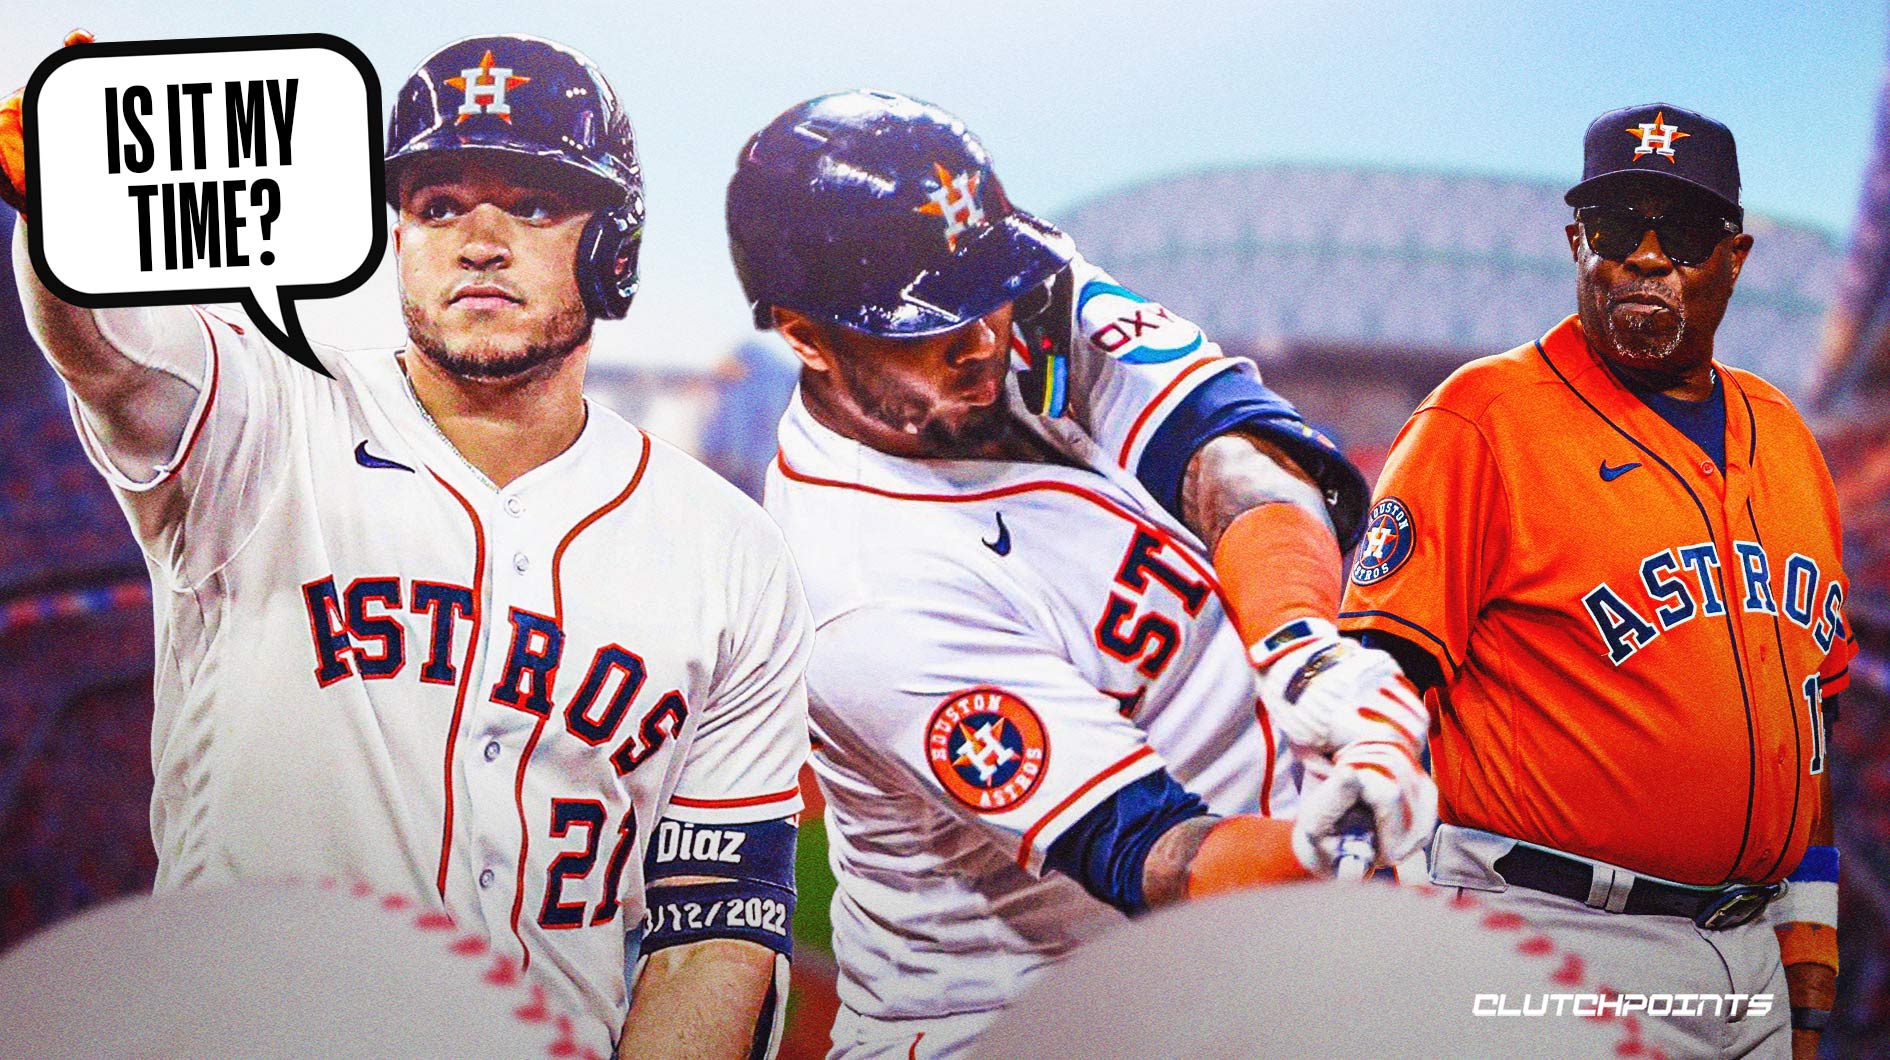 Yainer Diaz is 'the future'. How can the Astros use him more in